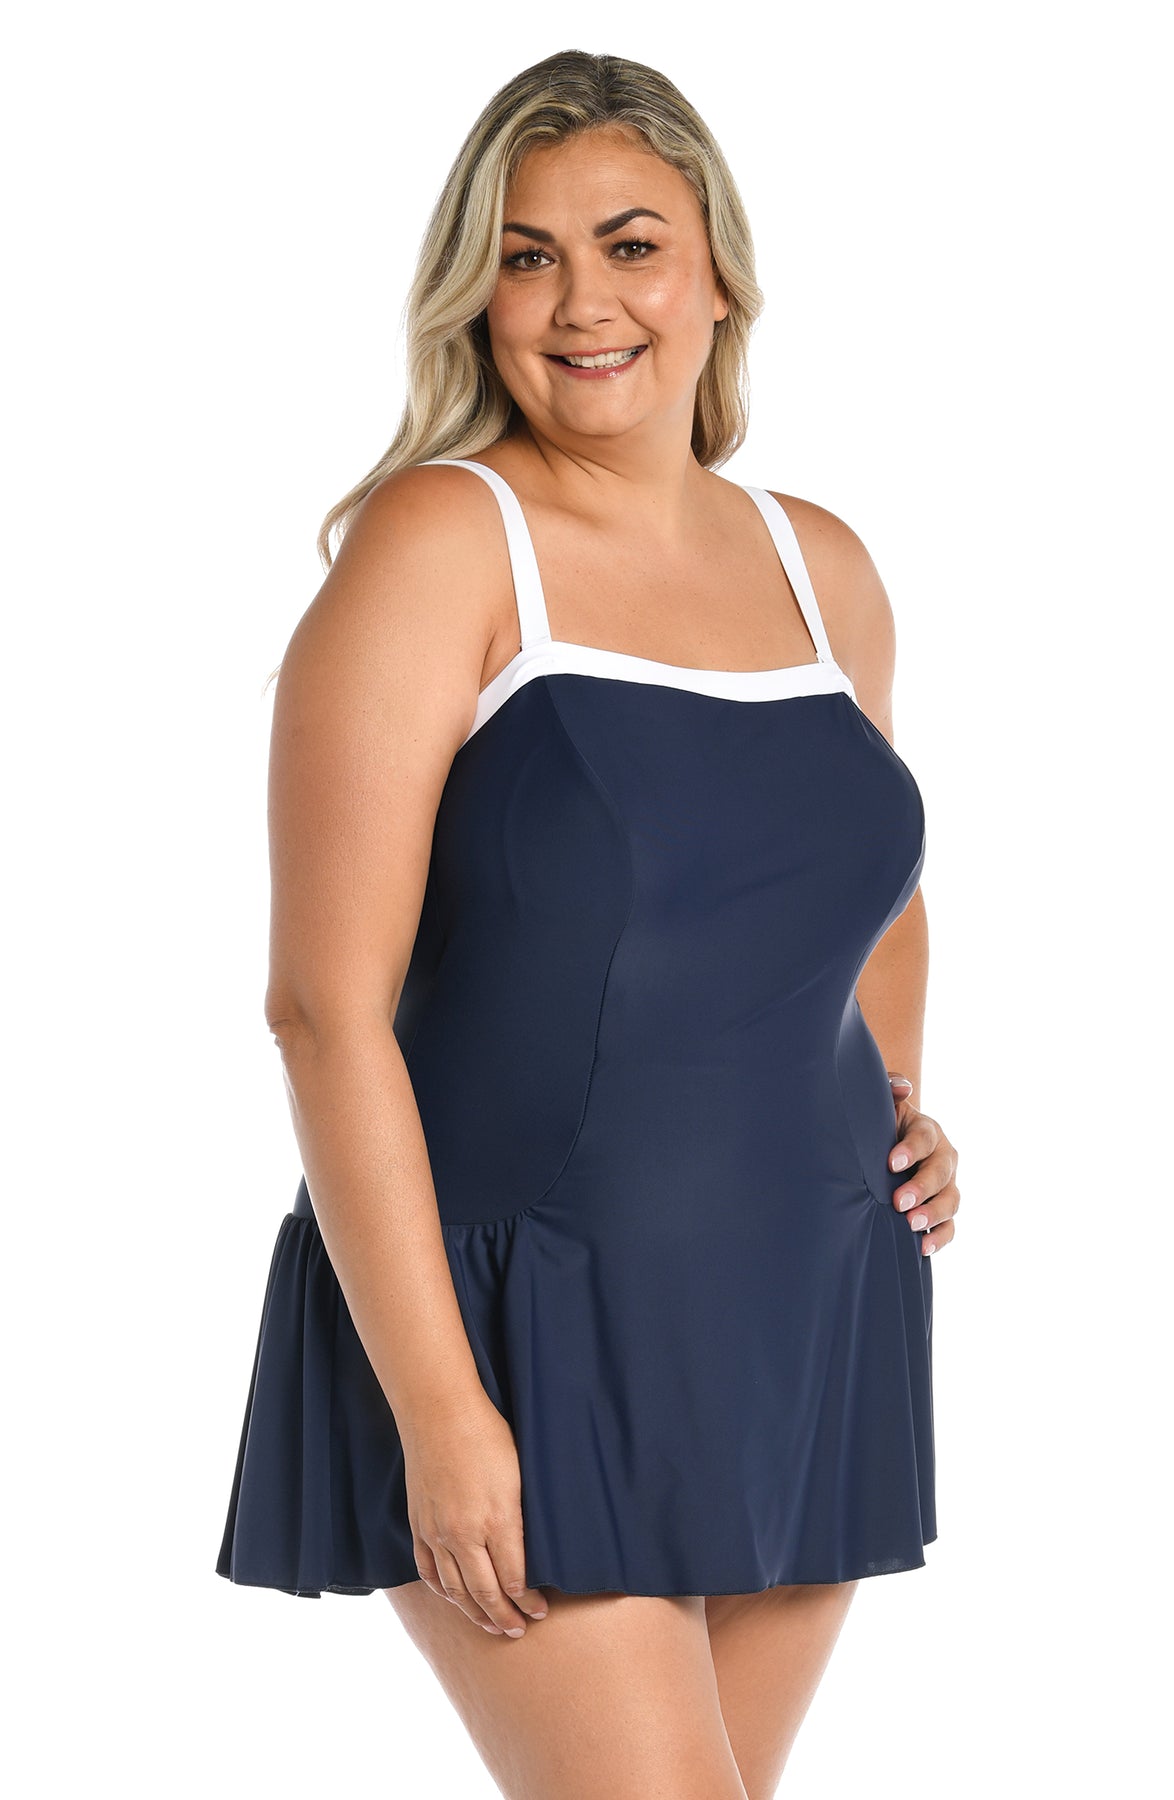 Love Los Angeles Strappy Mesh Plus Size One Piece Swimsuit - ShopperBoard